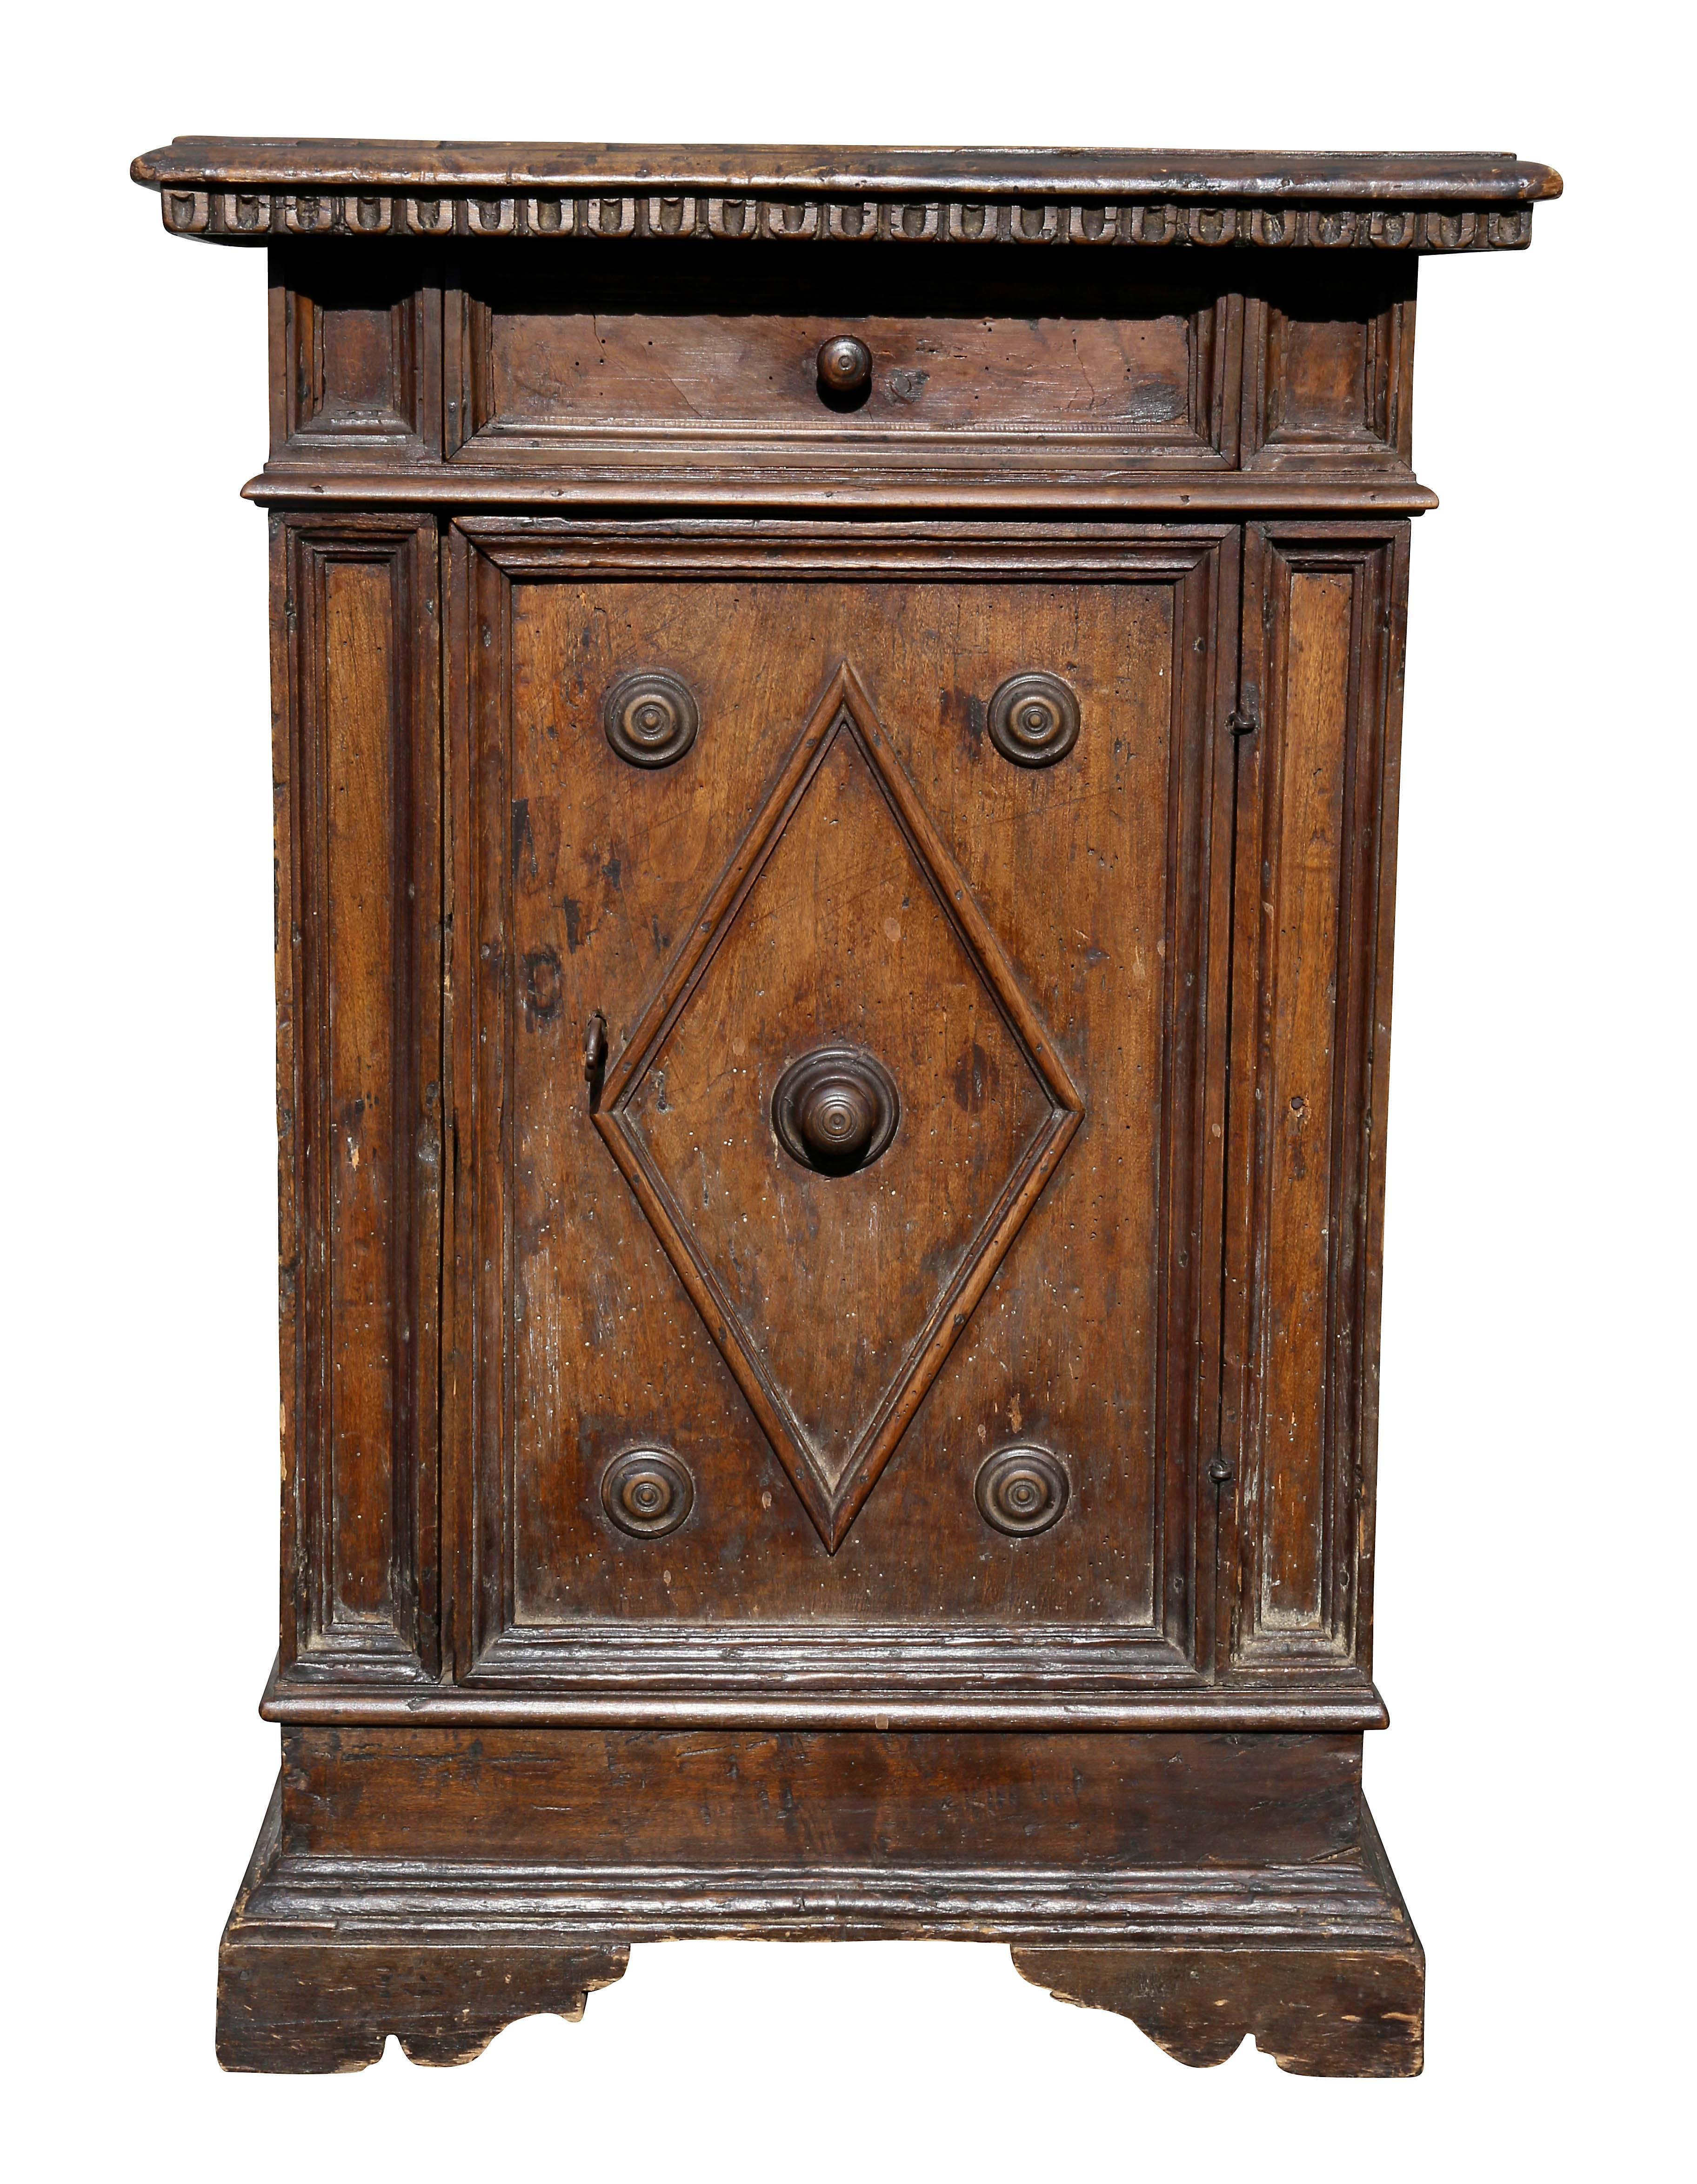 Rectangular top over a drawer and a door with a diamond shaped molding with four roundels, bracket feet.